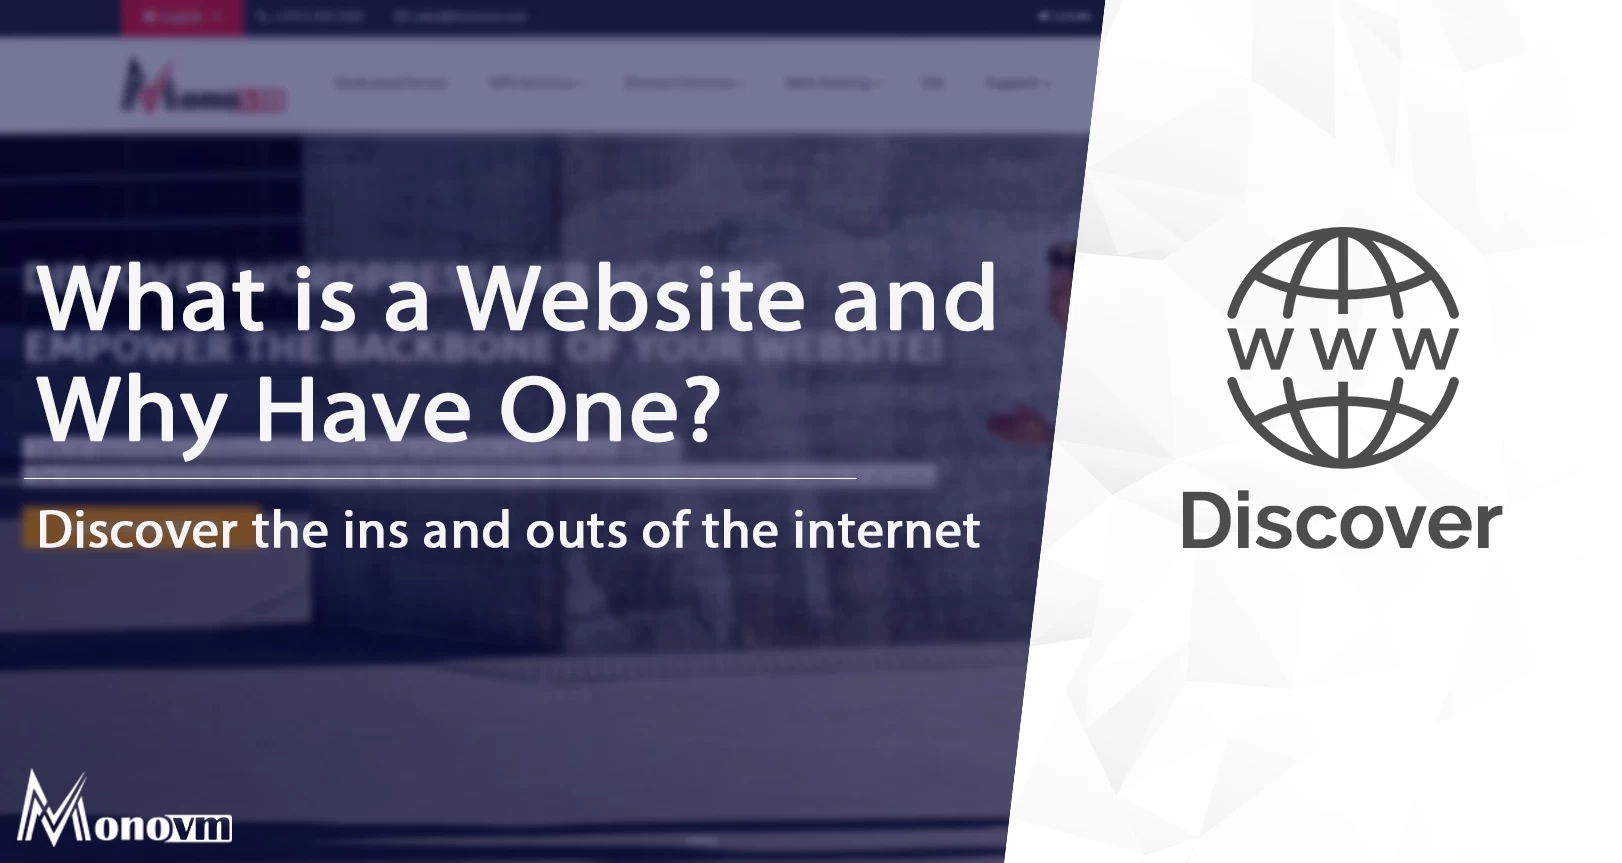 What is a Website? [Definition] Essential Elements and Types Explained